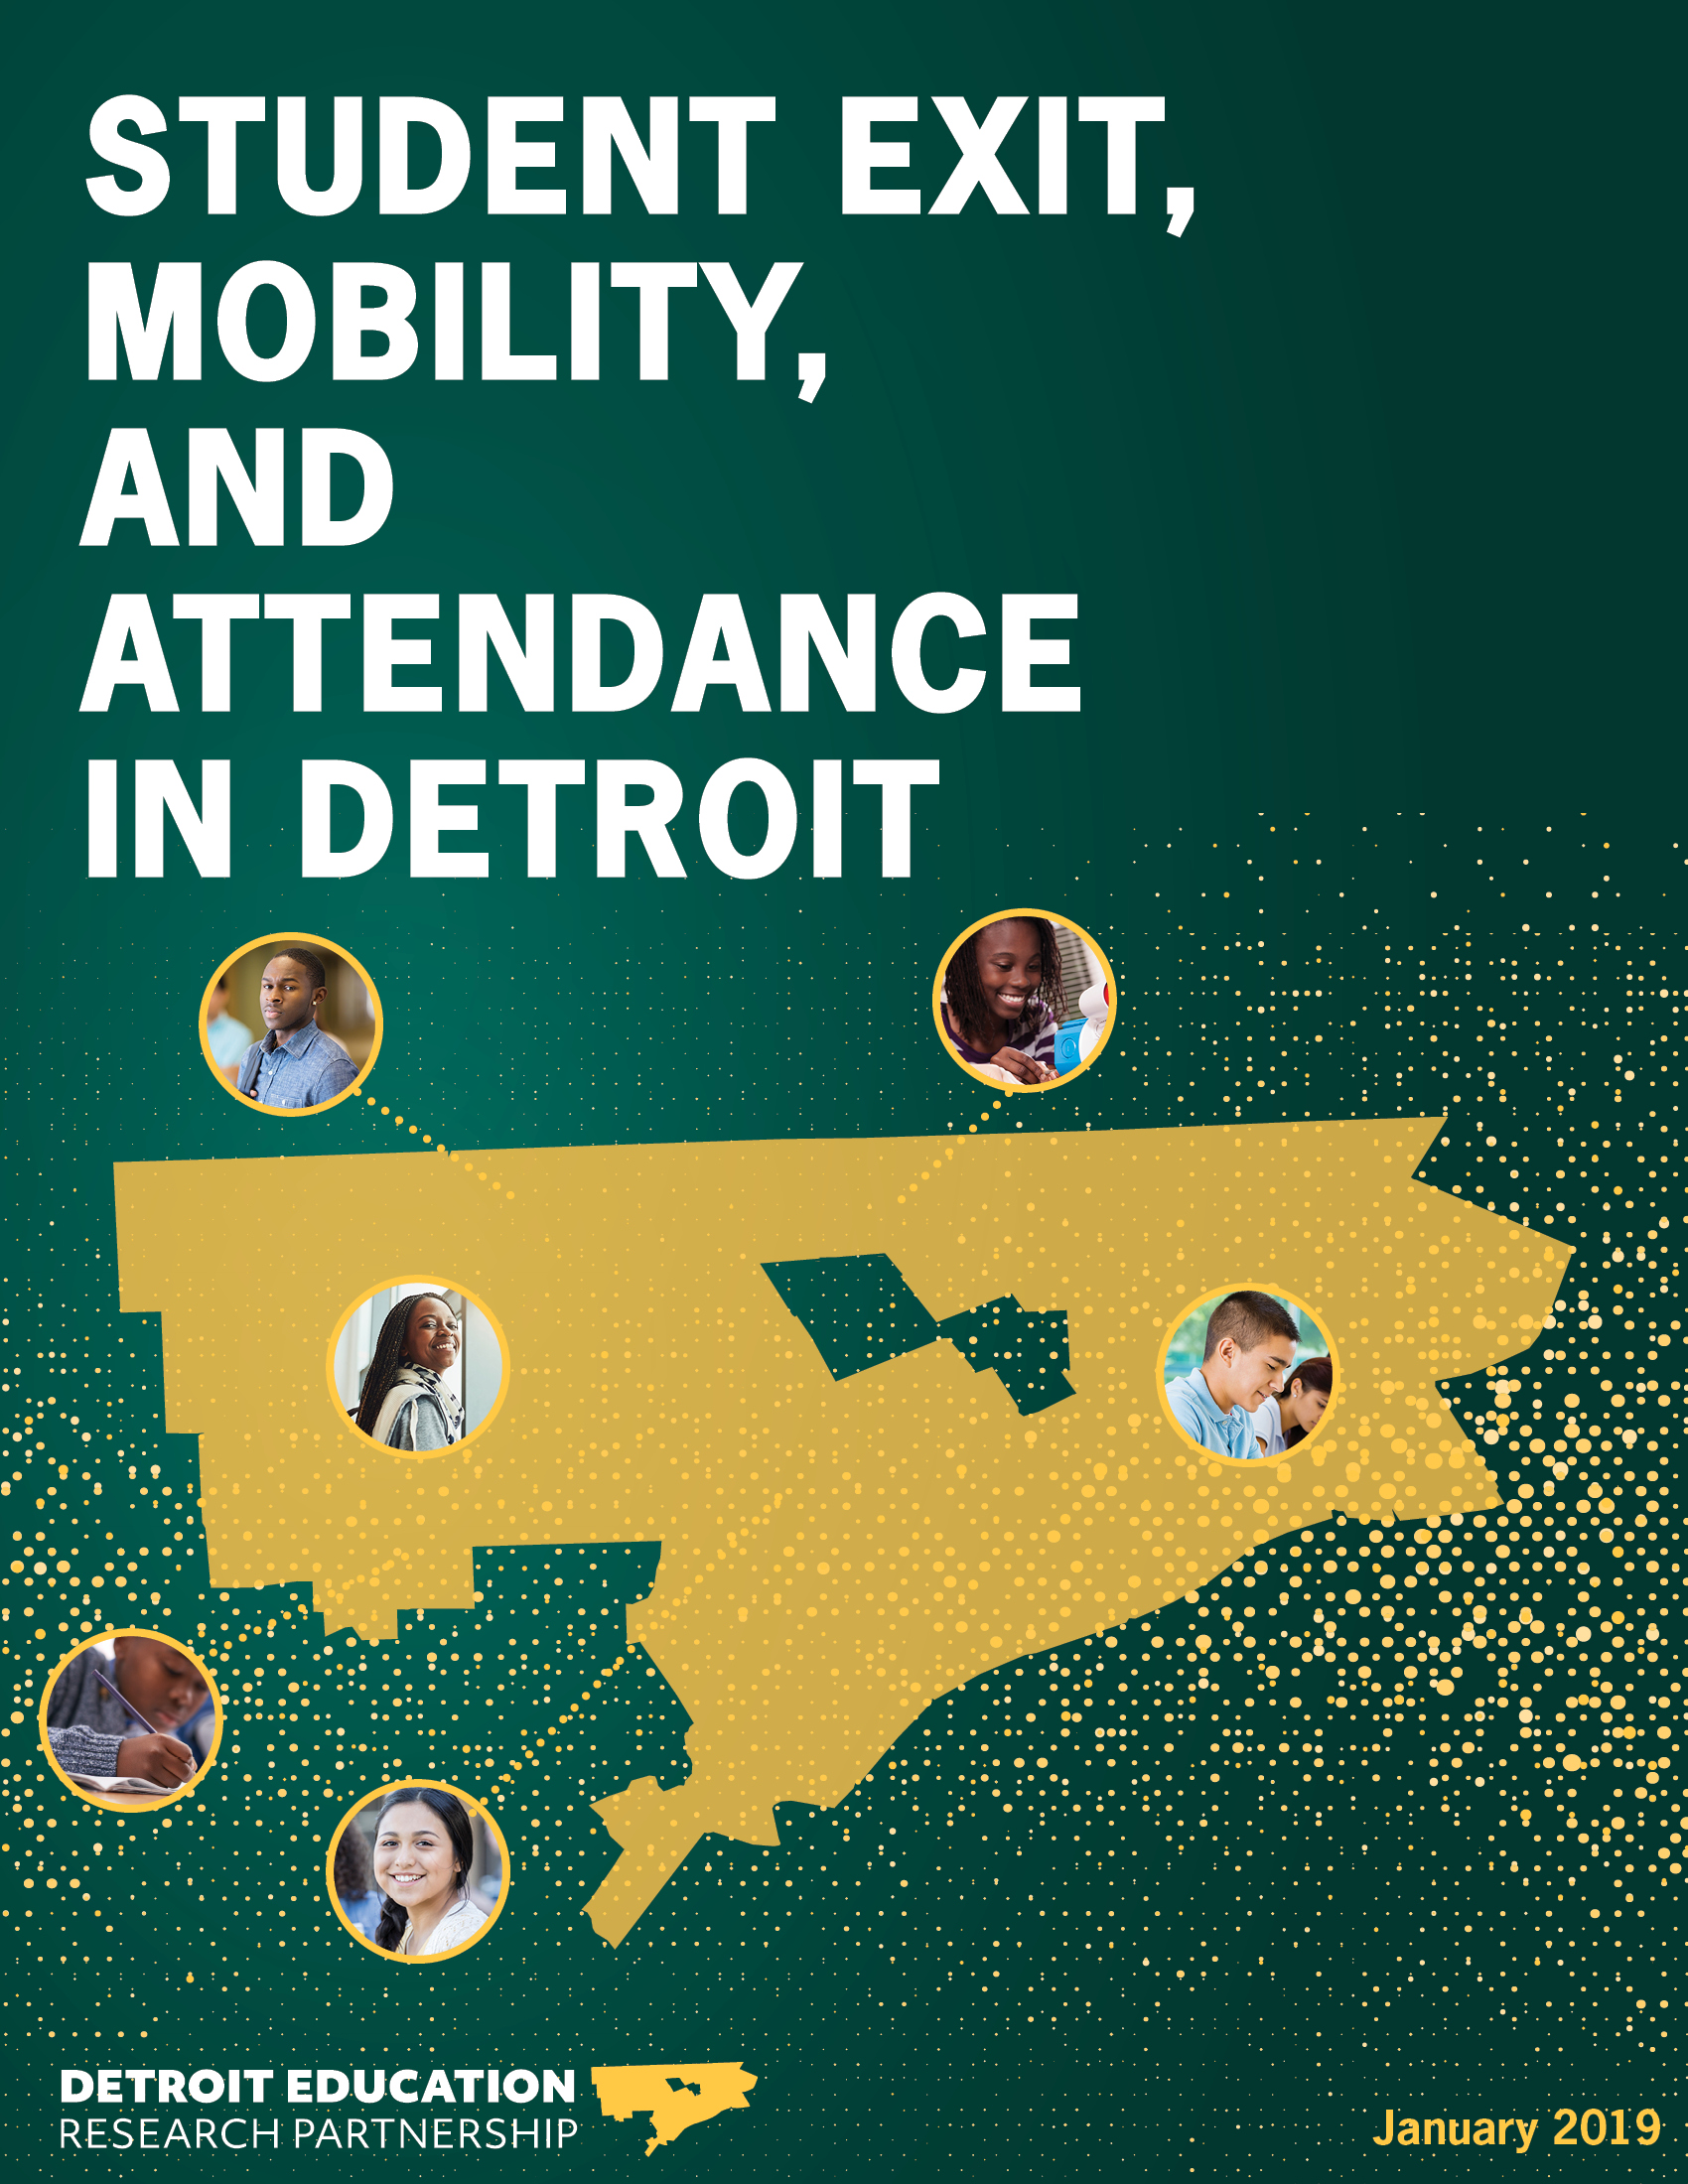 Image of the boundaries of Detroit with images of students inside. Title overlaid